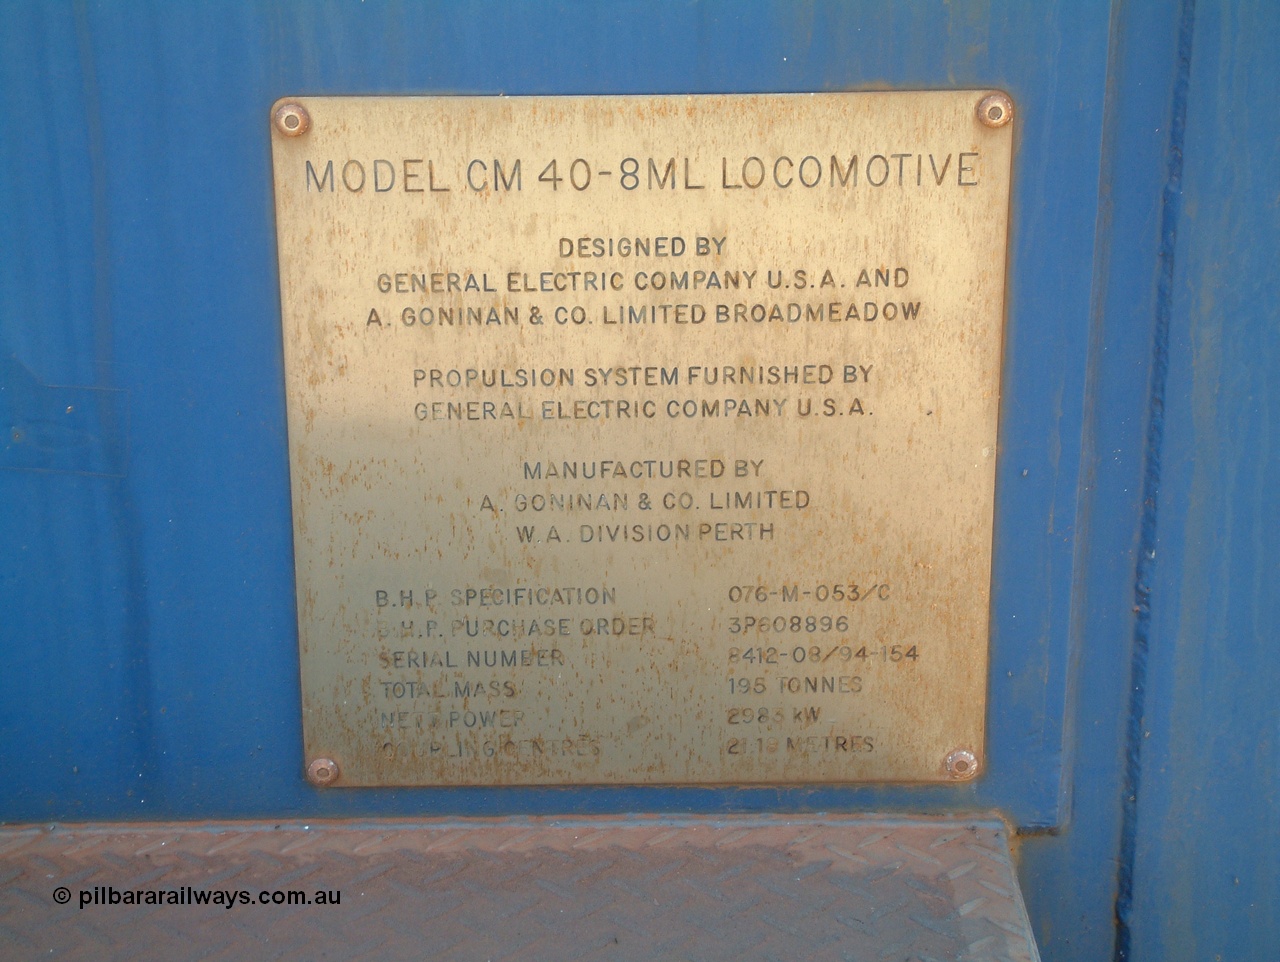 041014 122446
Pilbara Railways Historical Society, the builders plate from Goninan WA rebuild CM40-8ML unit 5663 Newcastle, one of three units built without a driving cab in 1994 but with a Locotrol equipment cabinet to do away with the Locotrol waggons that were in use at the time. Donated to the Society around 1998? 14th October 2004.
Keywords: 5663;Goninan;GE;CM40-8ML;8412-08/94-154;rebuild;AE-Goodwin;ALCo;M636C;5476;G6047-8